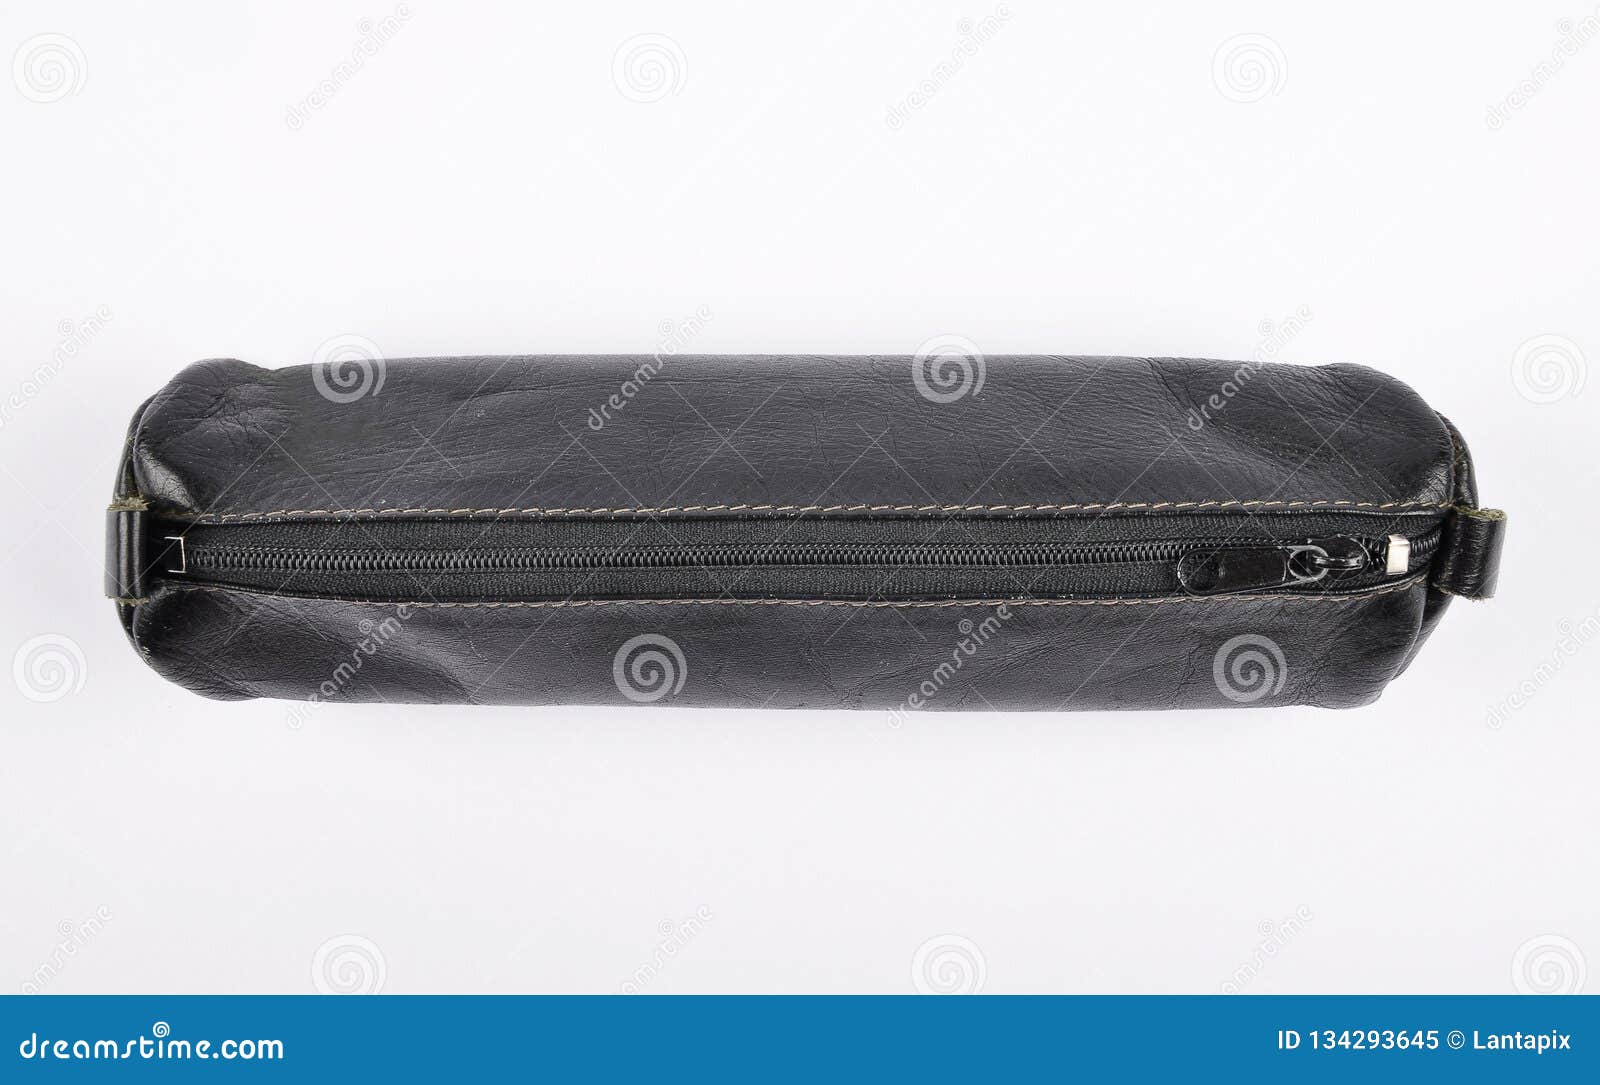 Pencil Case on White Background Stock Image - Image of supplies, school ...